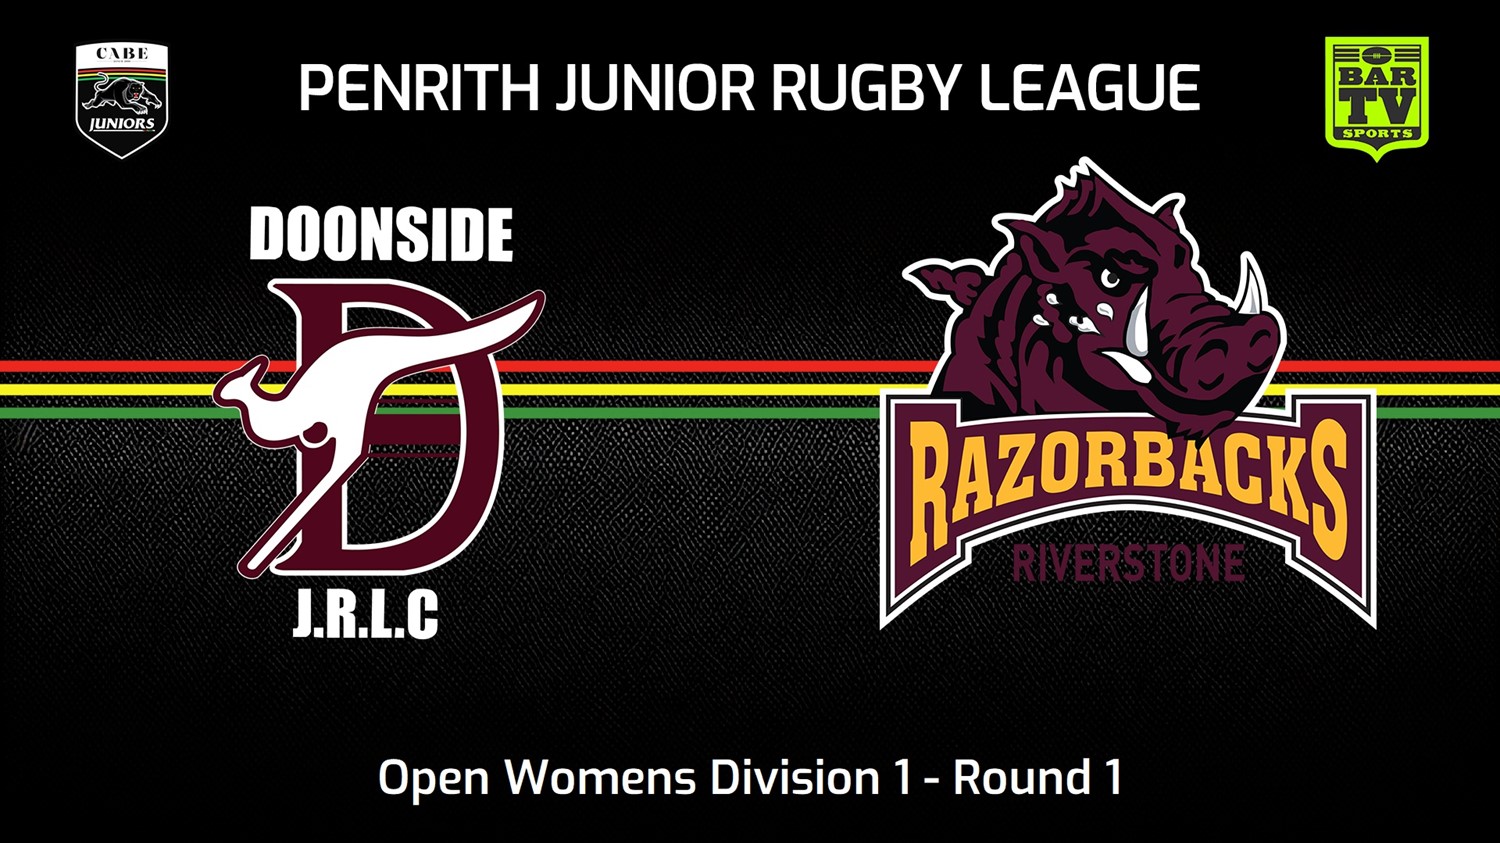 240421-video-Penrith & District Junior Rugby League Round 1 - Open Womens Division 1 - Doonside v Riverstone Razorbacks Slate Image